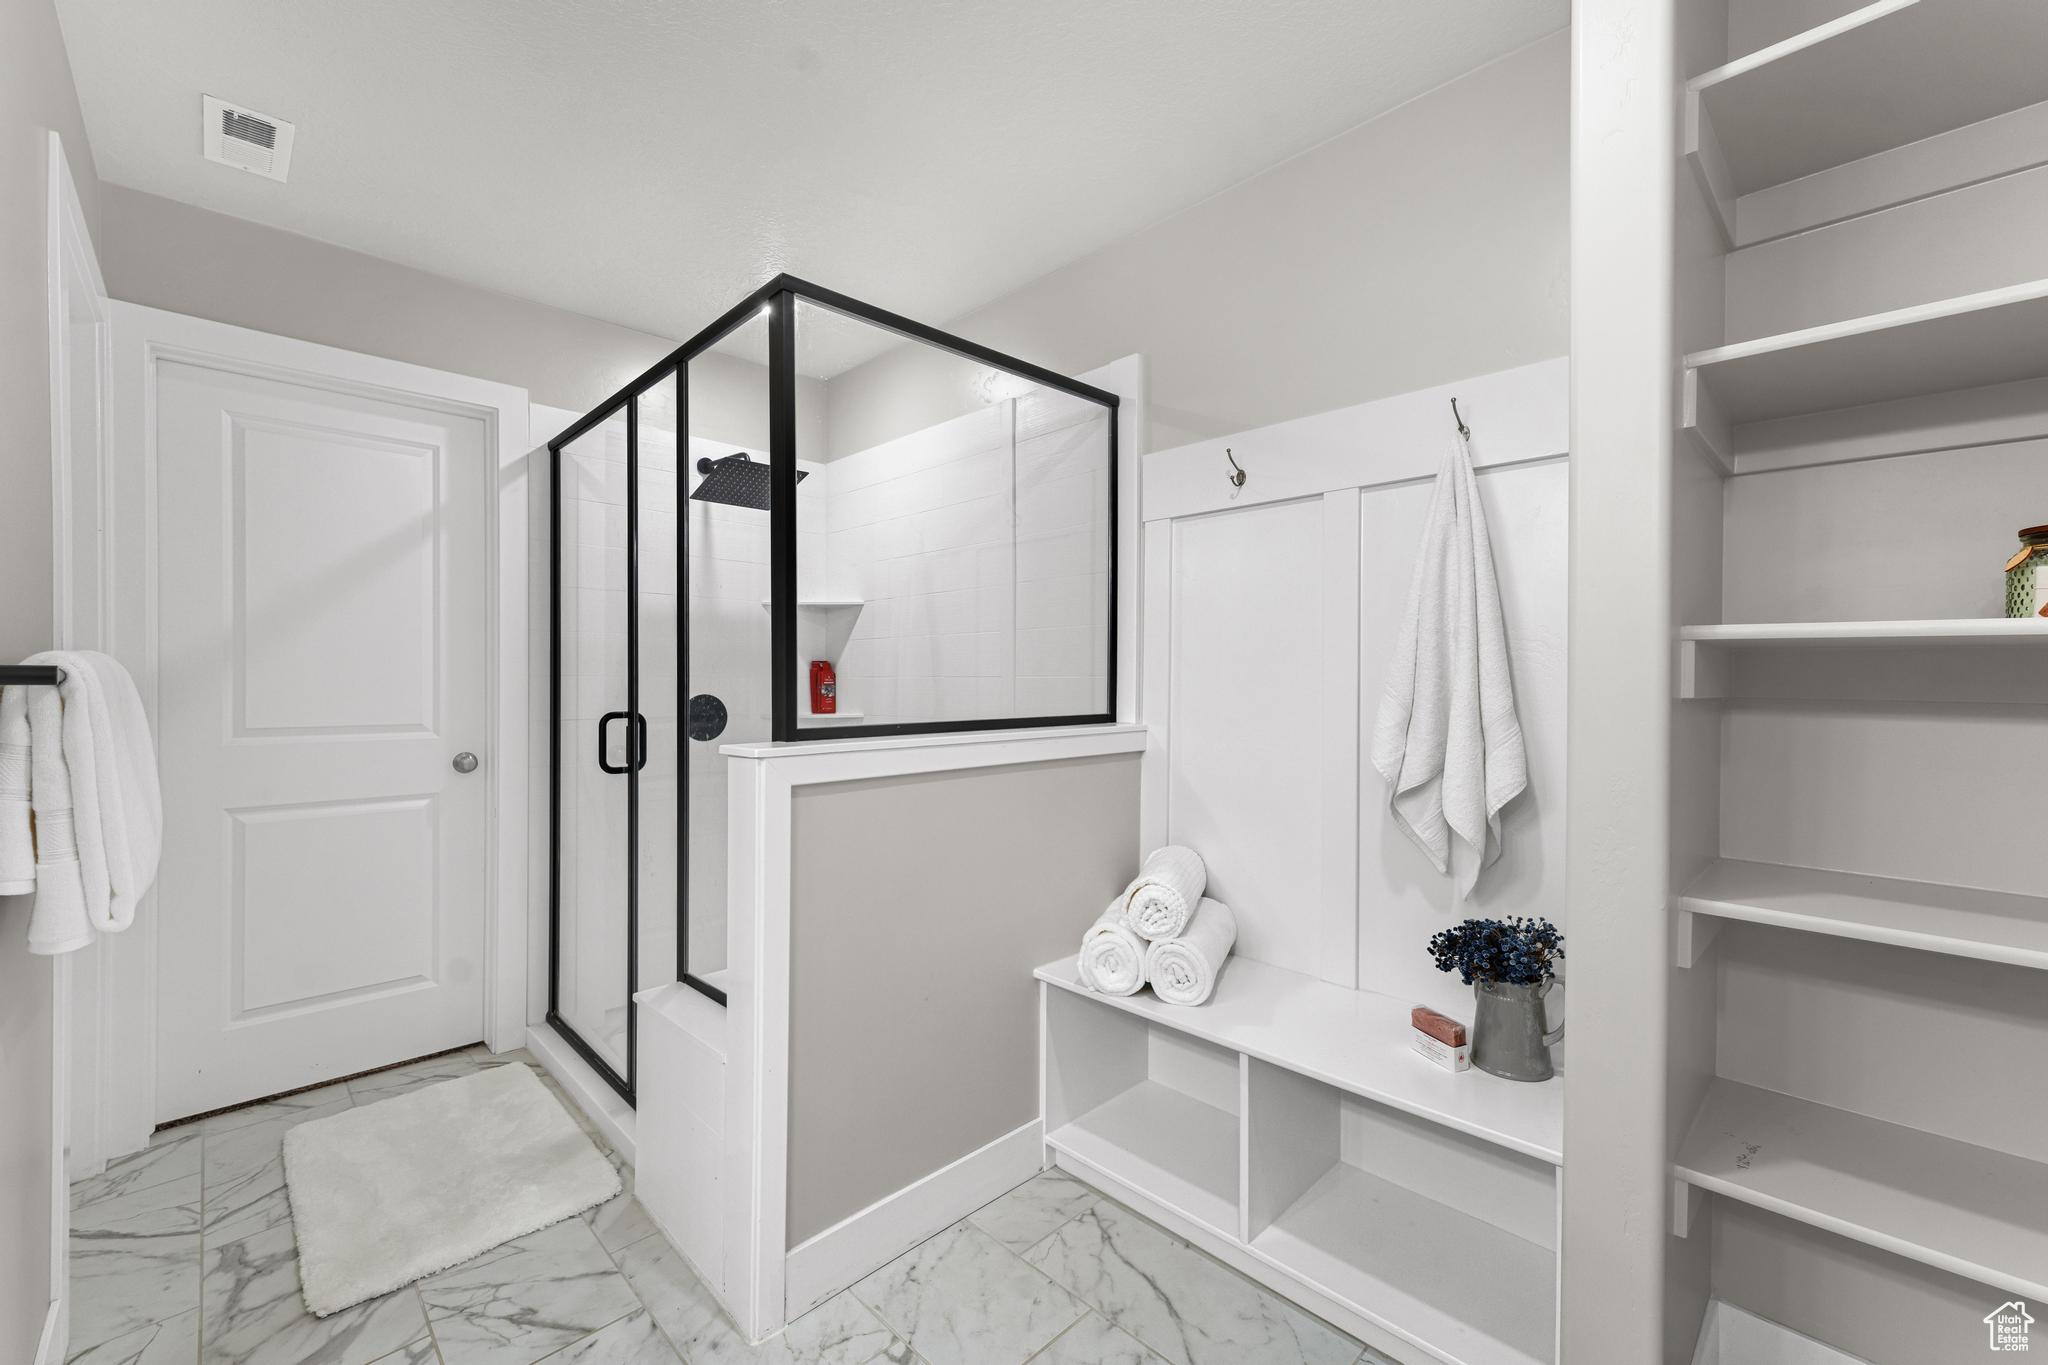 Upstairs Owner's Suite Bathroom Featuring Ample Storage, Two-Tone Paint, and Luxurious Oversized Shower